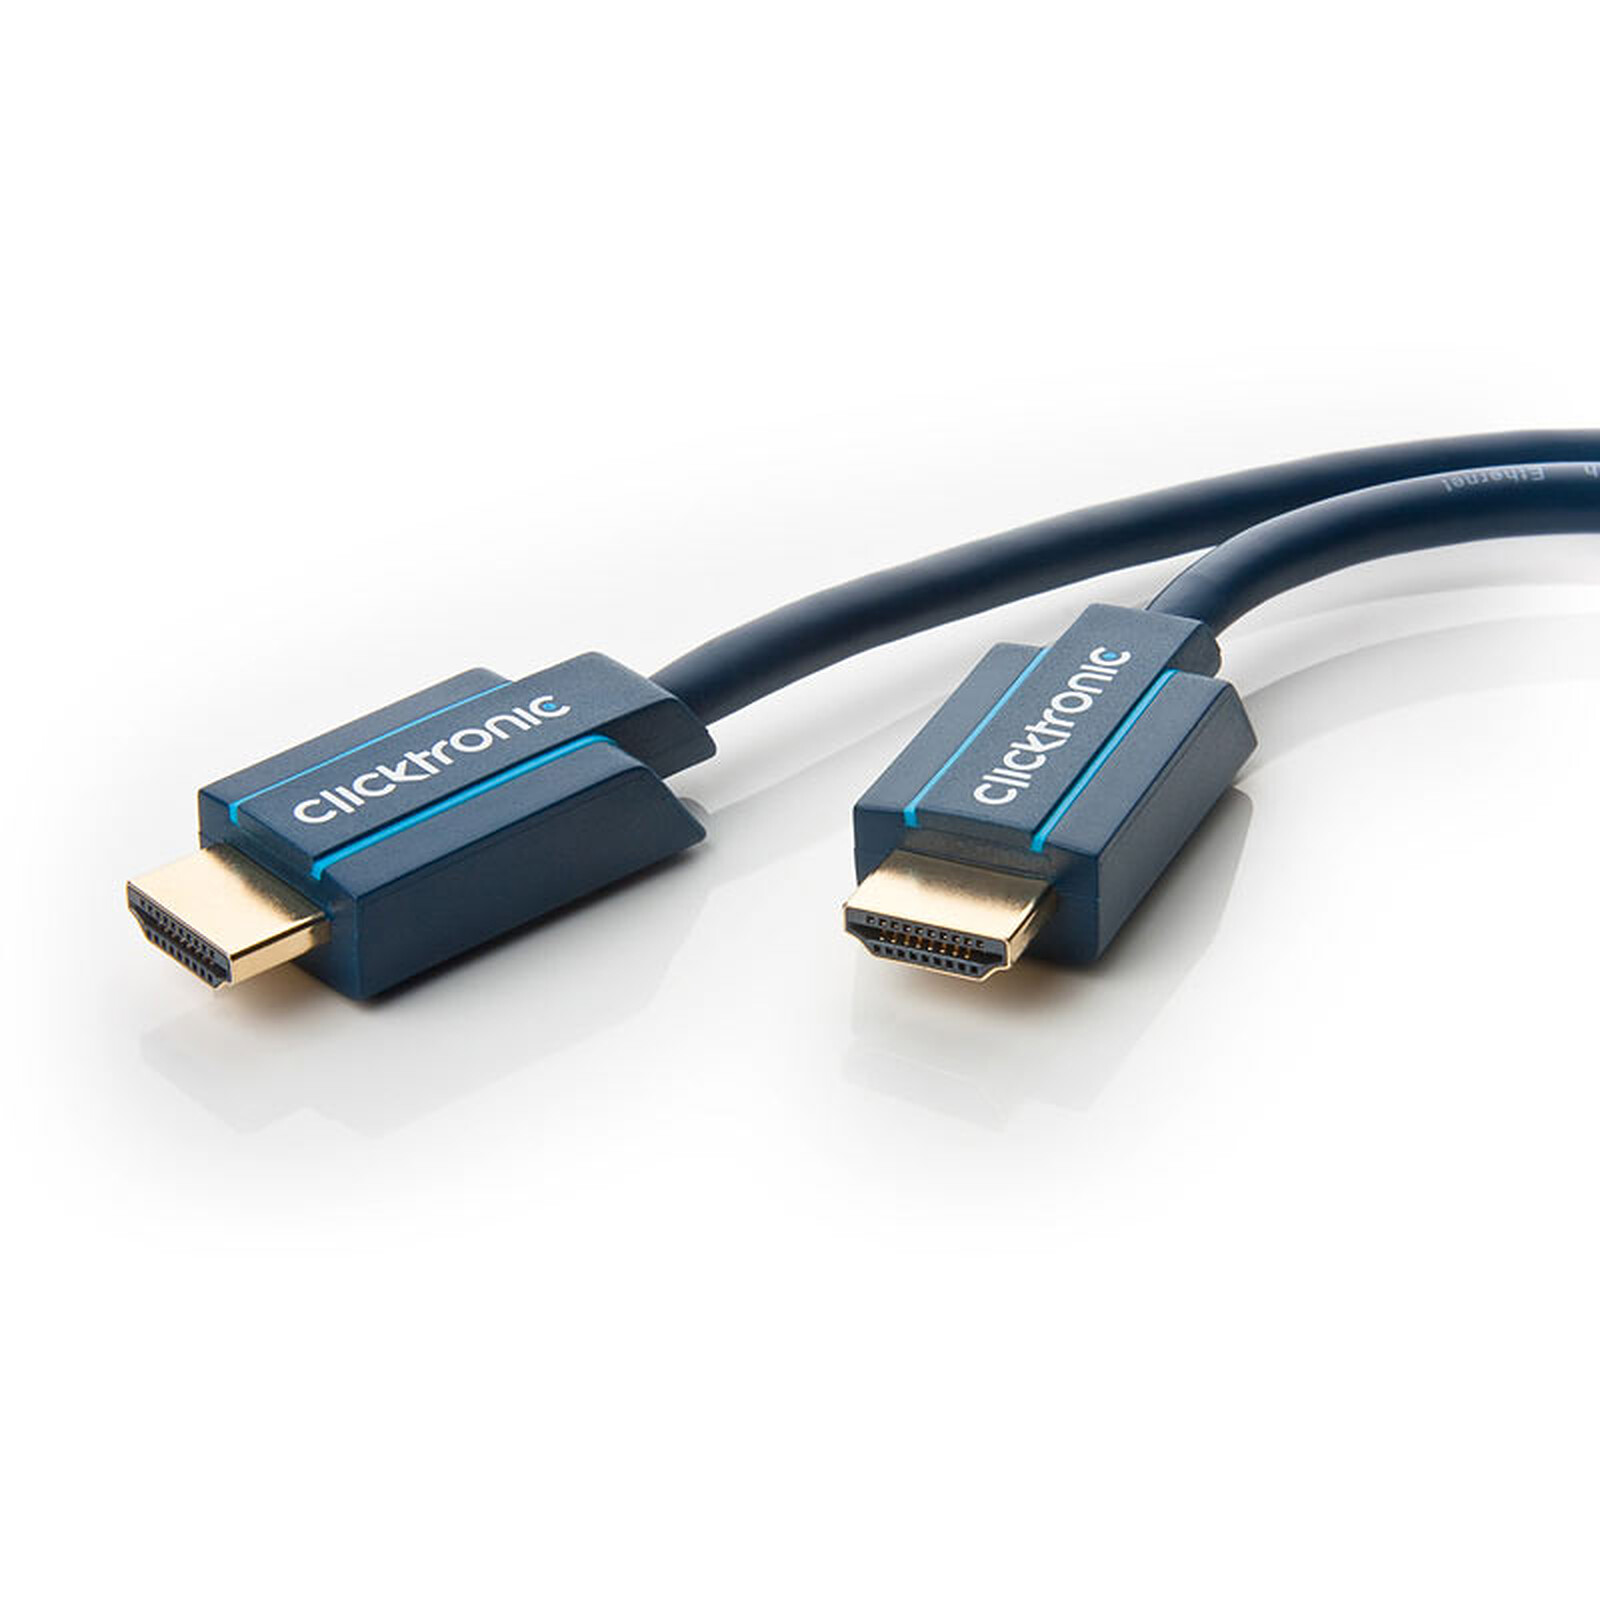 Clicktronic cble High Speed HDMI with (3 meters) - Clicktronic on LDLC